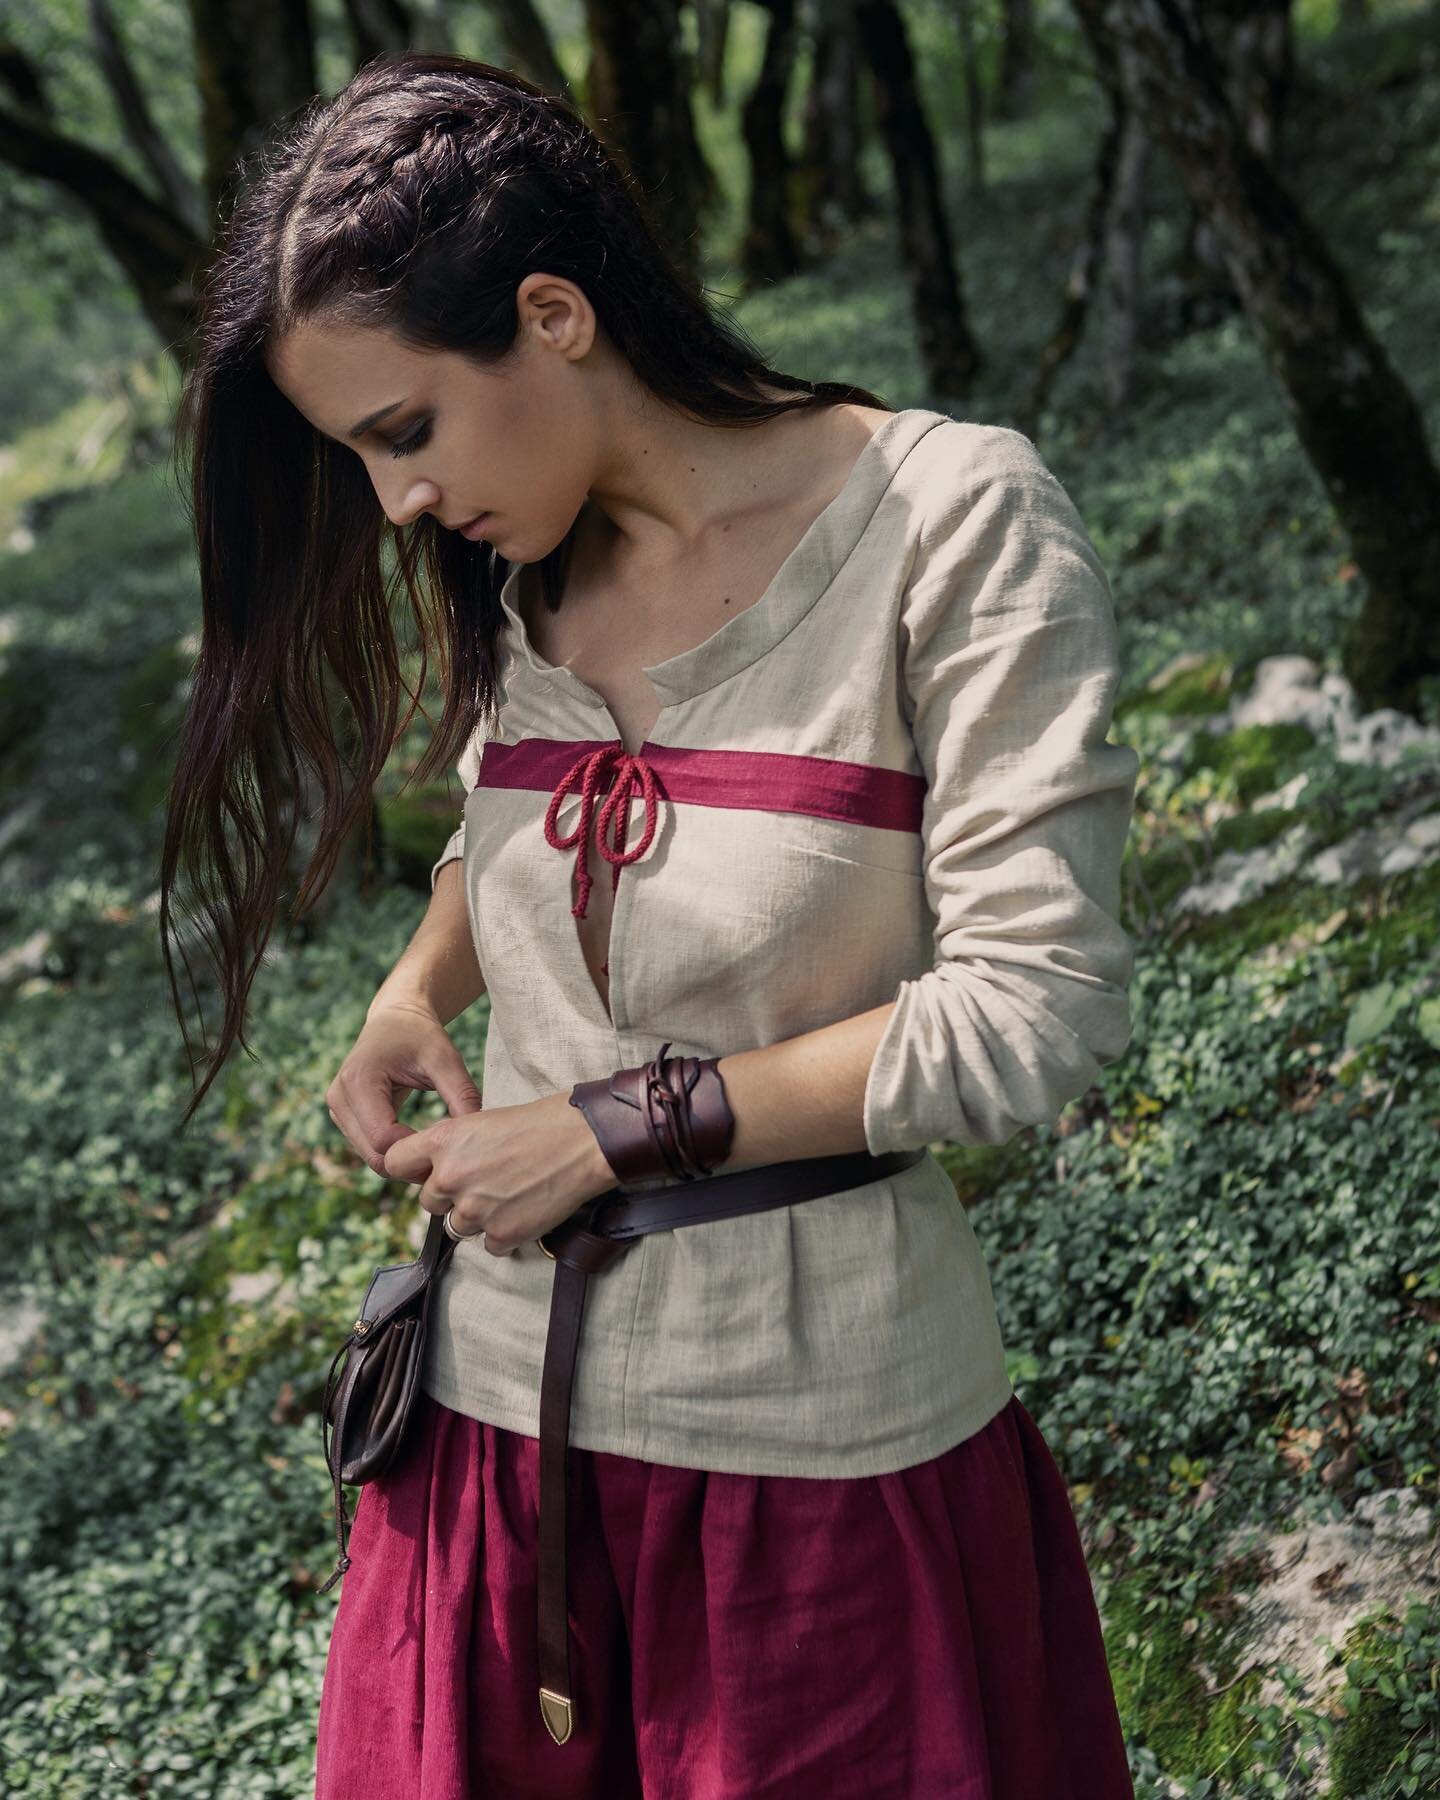 Yarilu&rsquo;s Etsy is open again !
You can visit it here: 
Etsy.com/shop/YariluWorkshop

🌿🌿🌿
Featured here: 
Our linen tunic inspired by Ciri (The Witcher). 

📷: @isildhen 
#yarilu #yariluworkshop #ciri #ciritunic #ciricosplay #thewitcher #witch